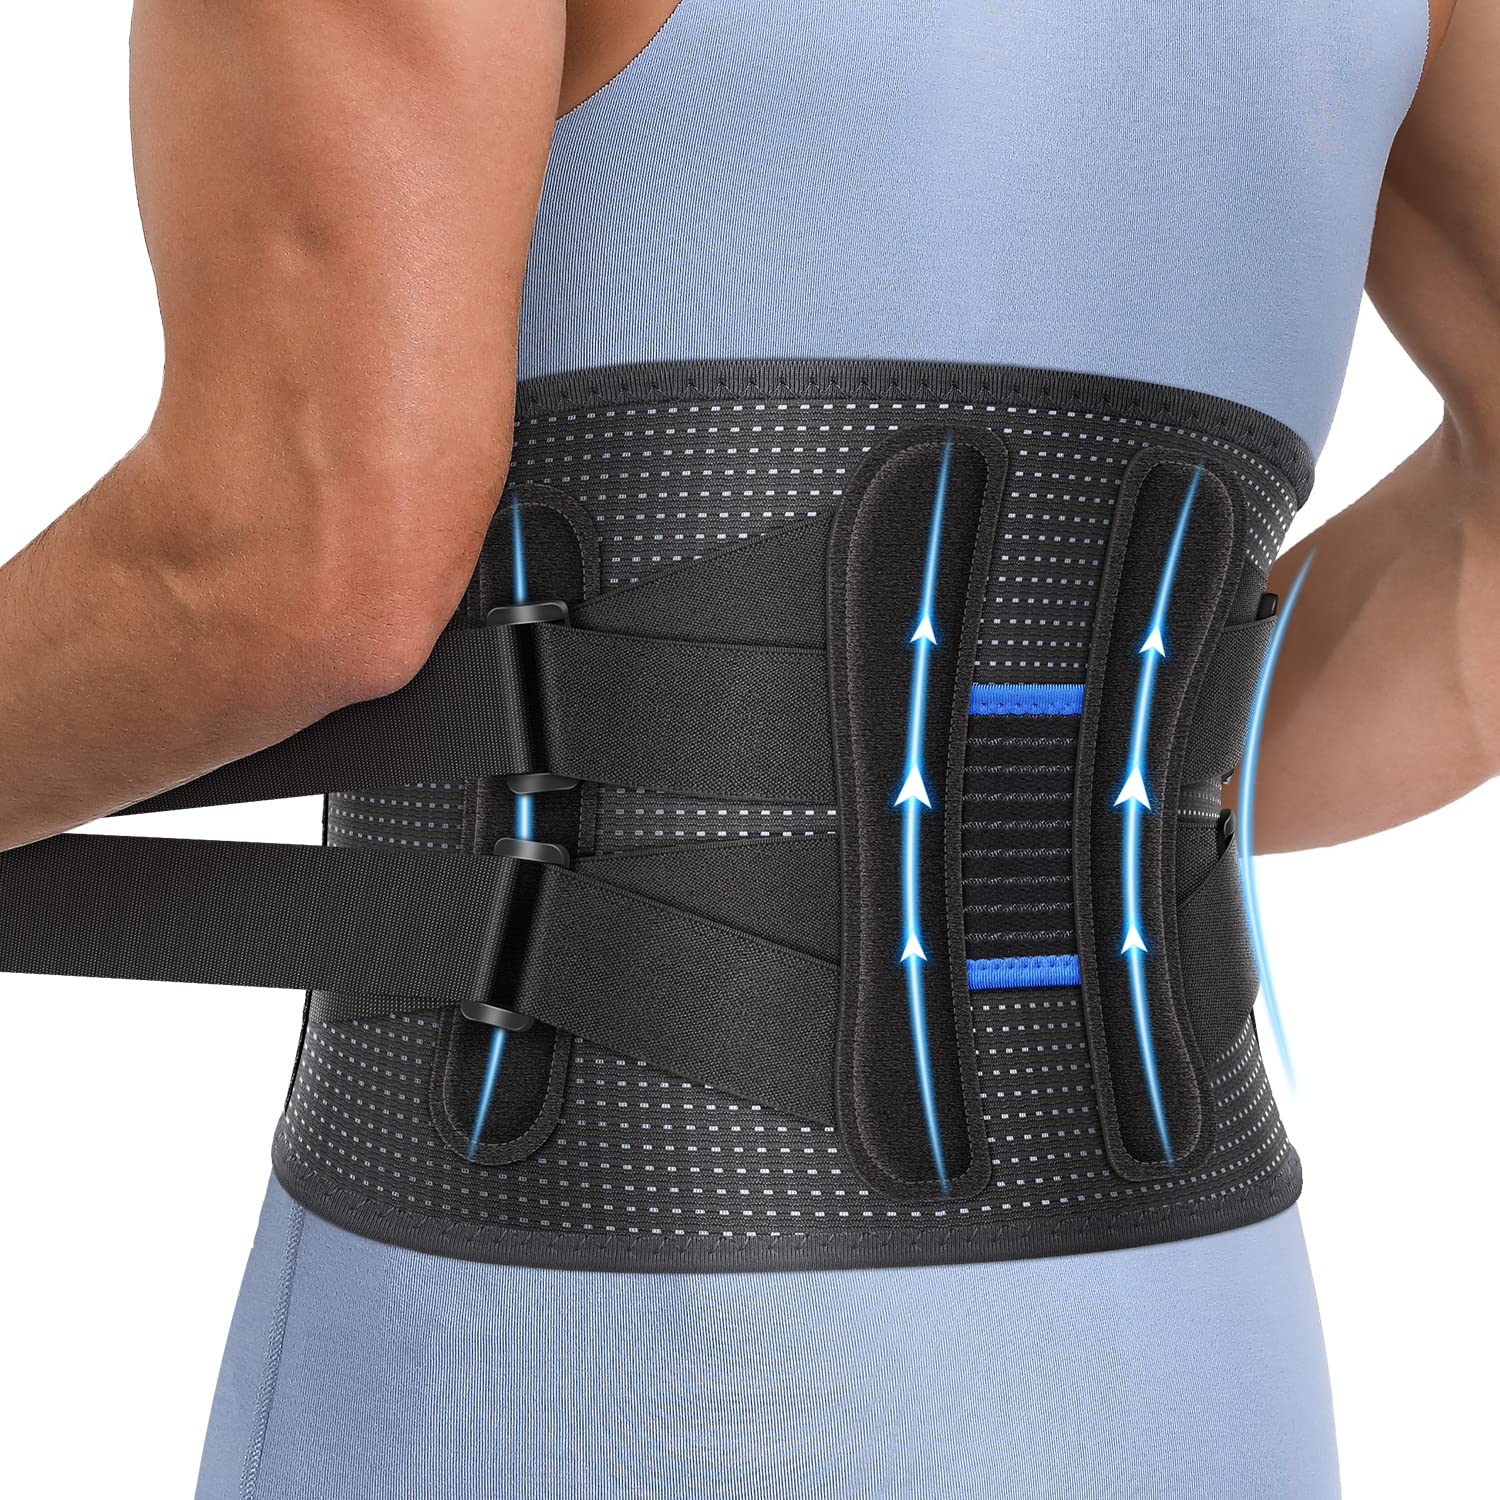  SNUG360 Back Brace for Men & Women - Get Relief from Lower Back  Pain, Herniated Disc, Sciatica & Scoliosis, Adjustable & Breathable Lumbar  Support Belt W/Double Pull & Back Pocket for